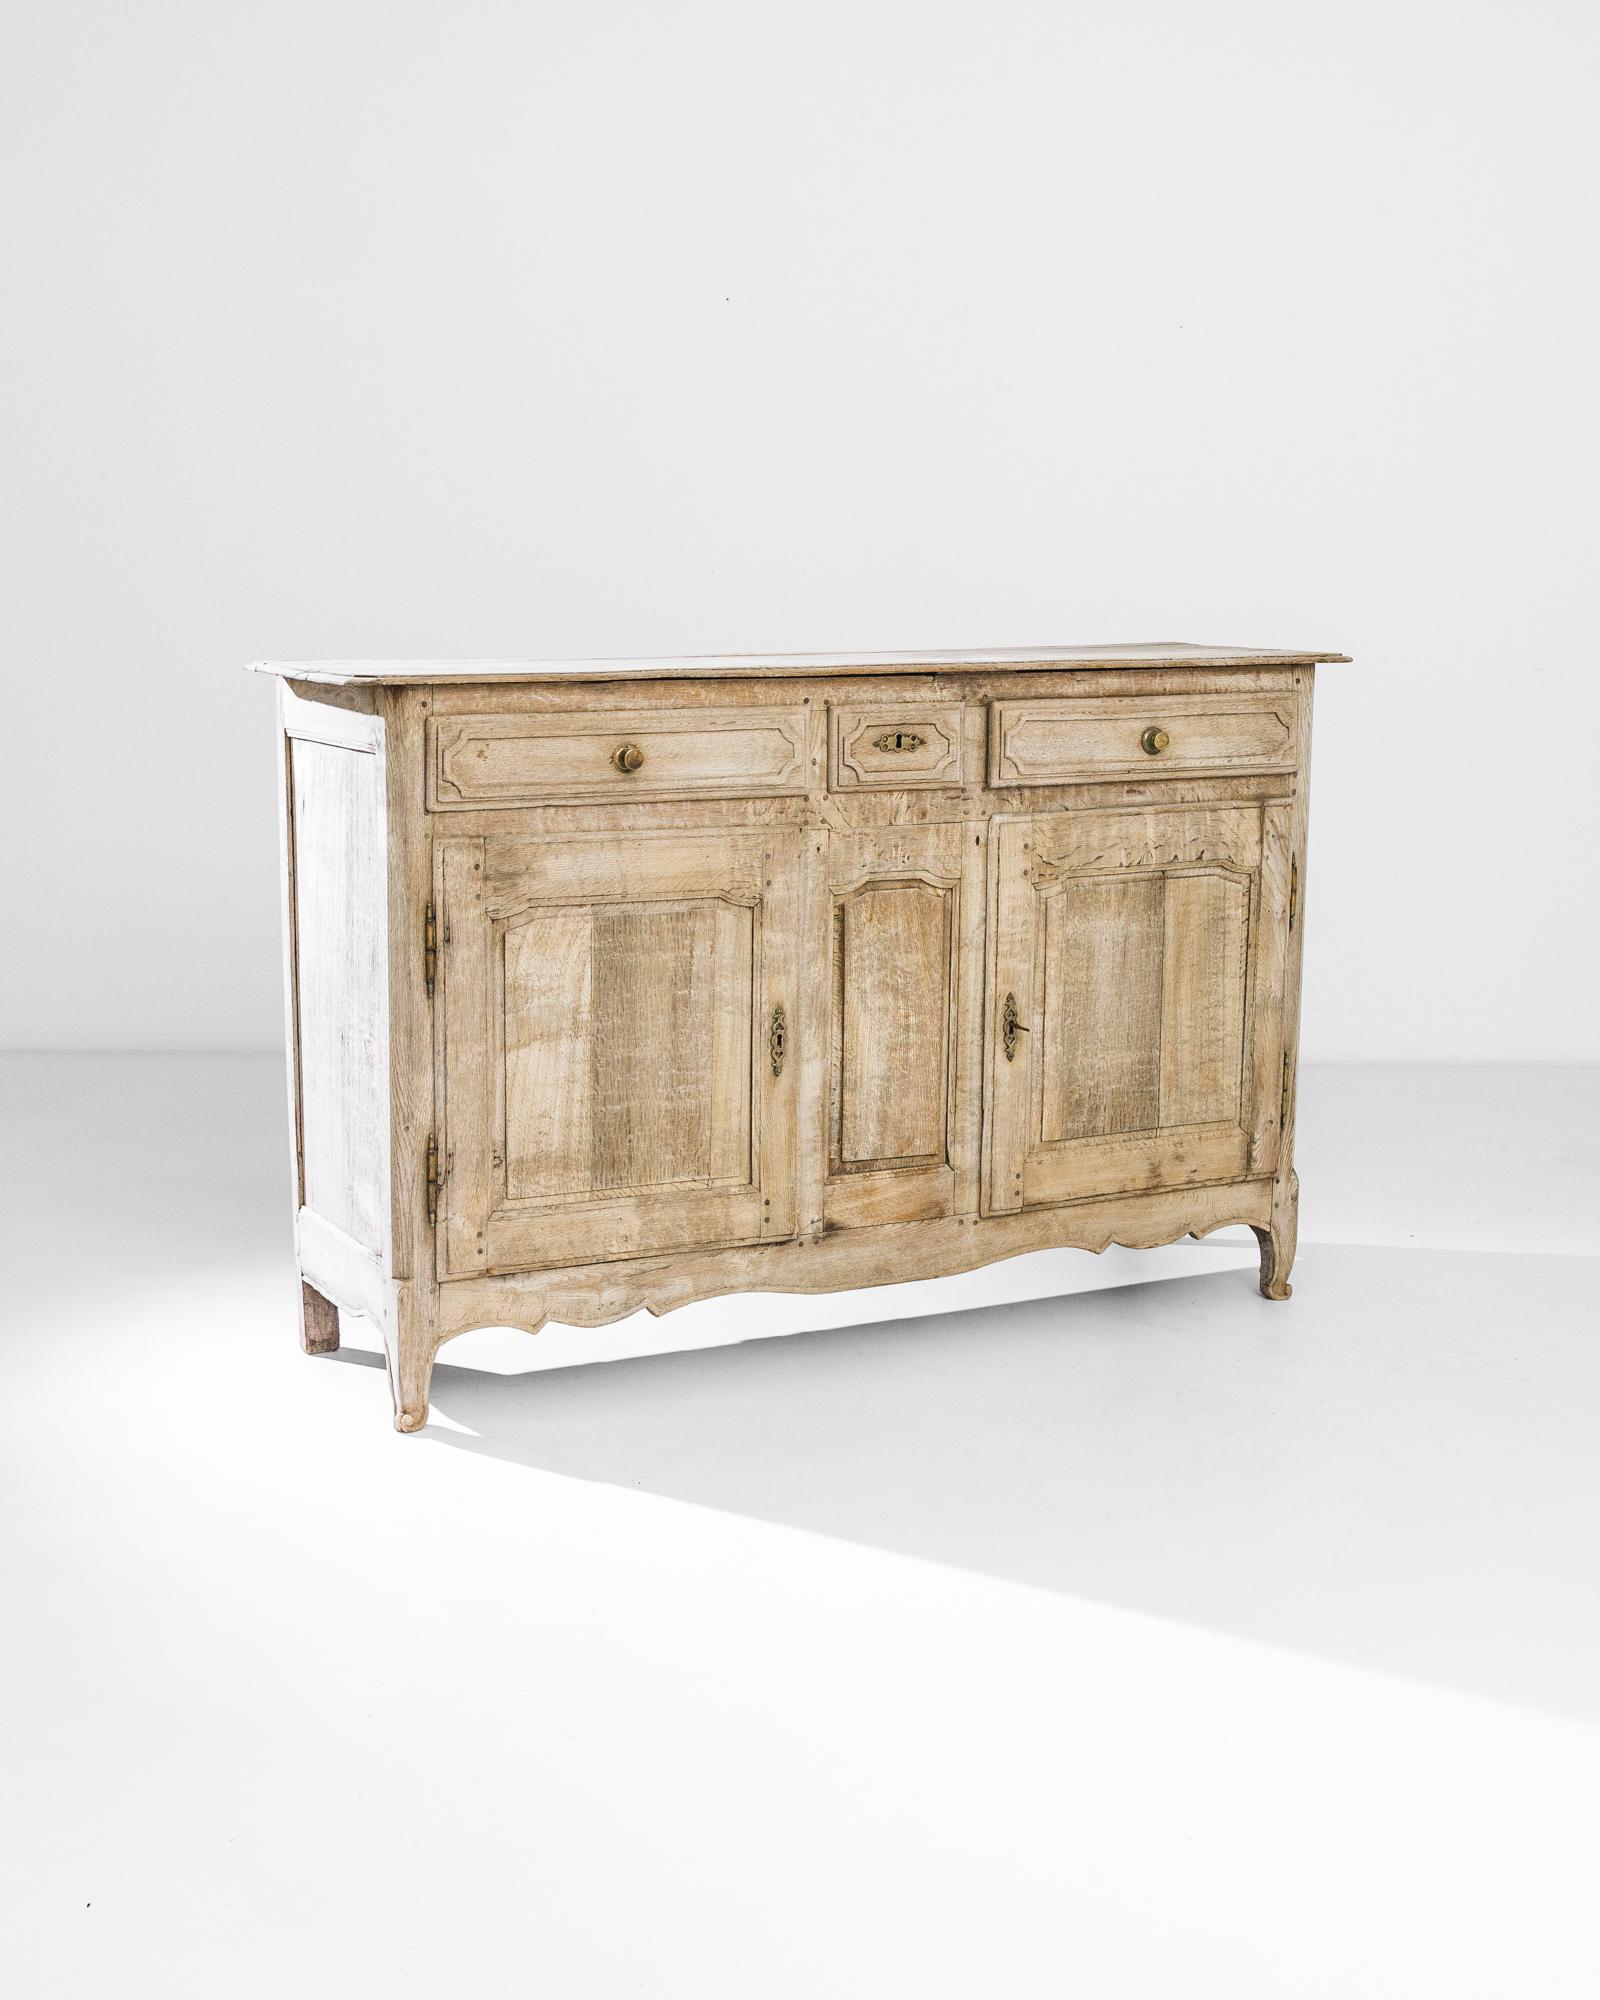 An oak buffet from 1840s France. Out-turned feet, slippered in carved scrolls, give the cabinet a graceful stance. The wood has been restored to natural finish, showcasing the luminous, barleycorn color of the oak, rippled with a subtle grain.